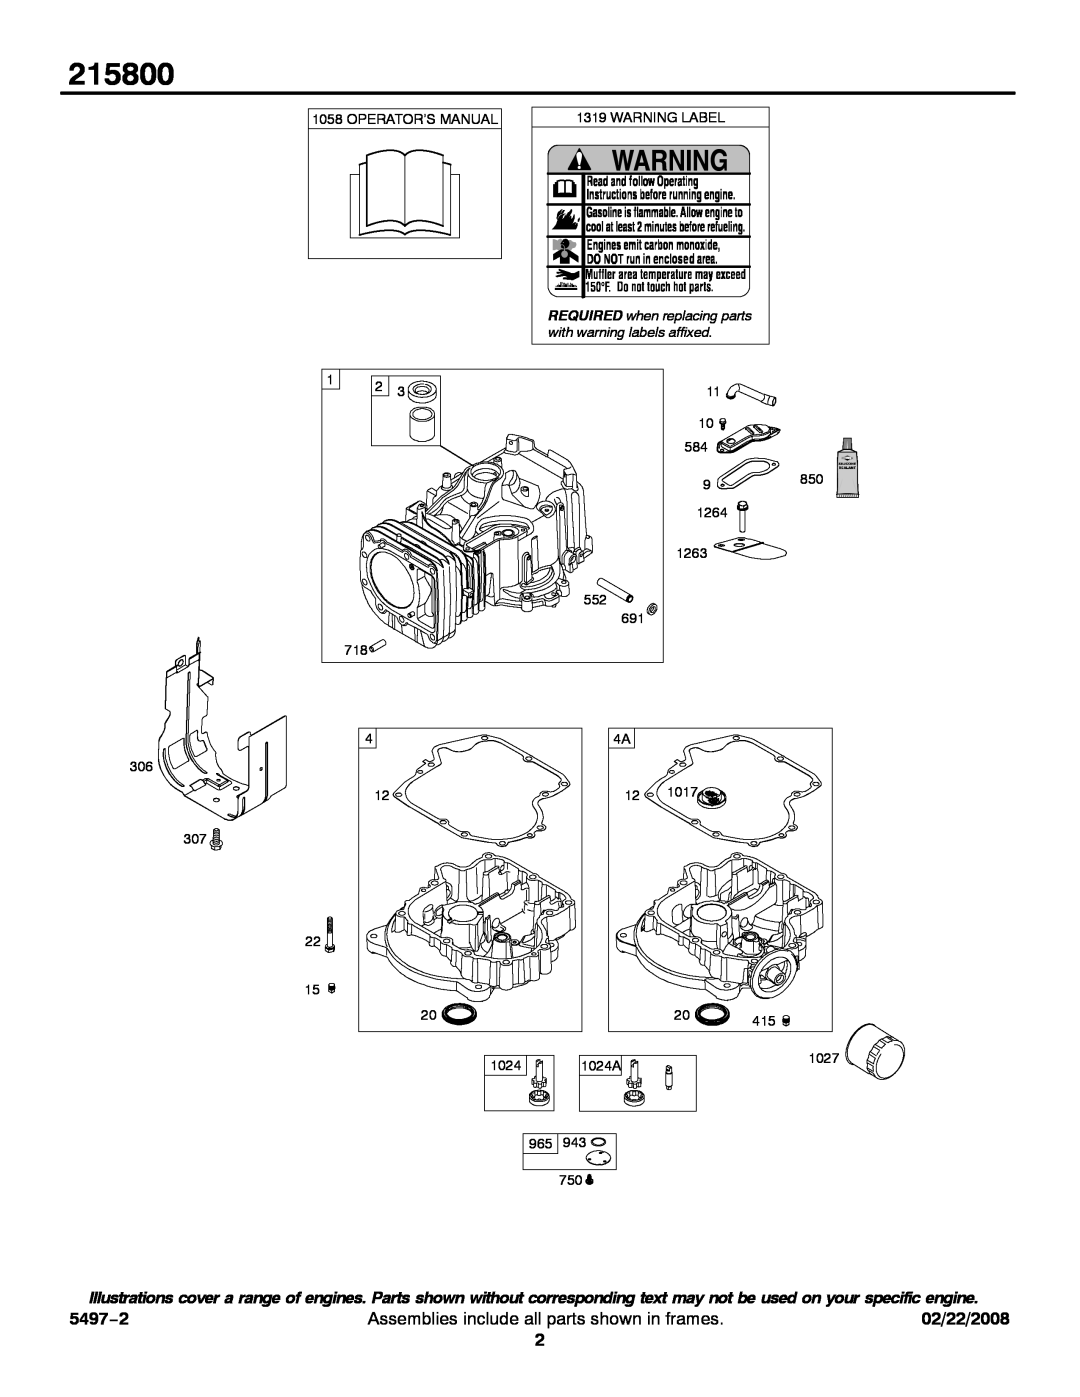 Briggs & Stratton 215800 service manual 5497−2, Assemblies include all parts shown in frames, 02/22/2008 